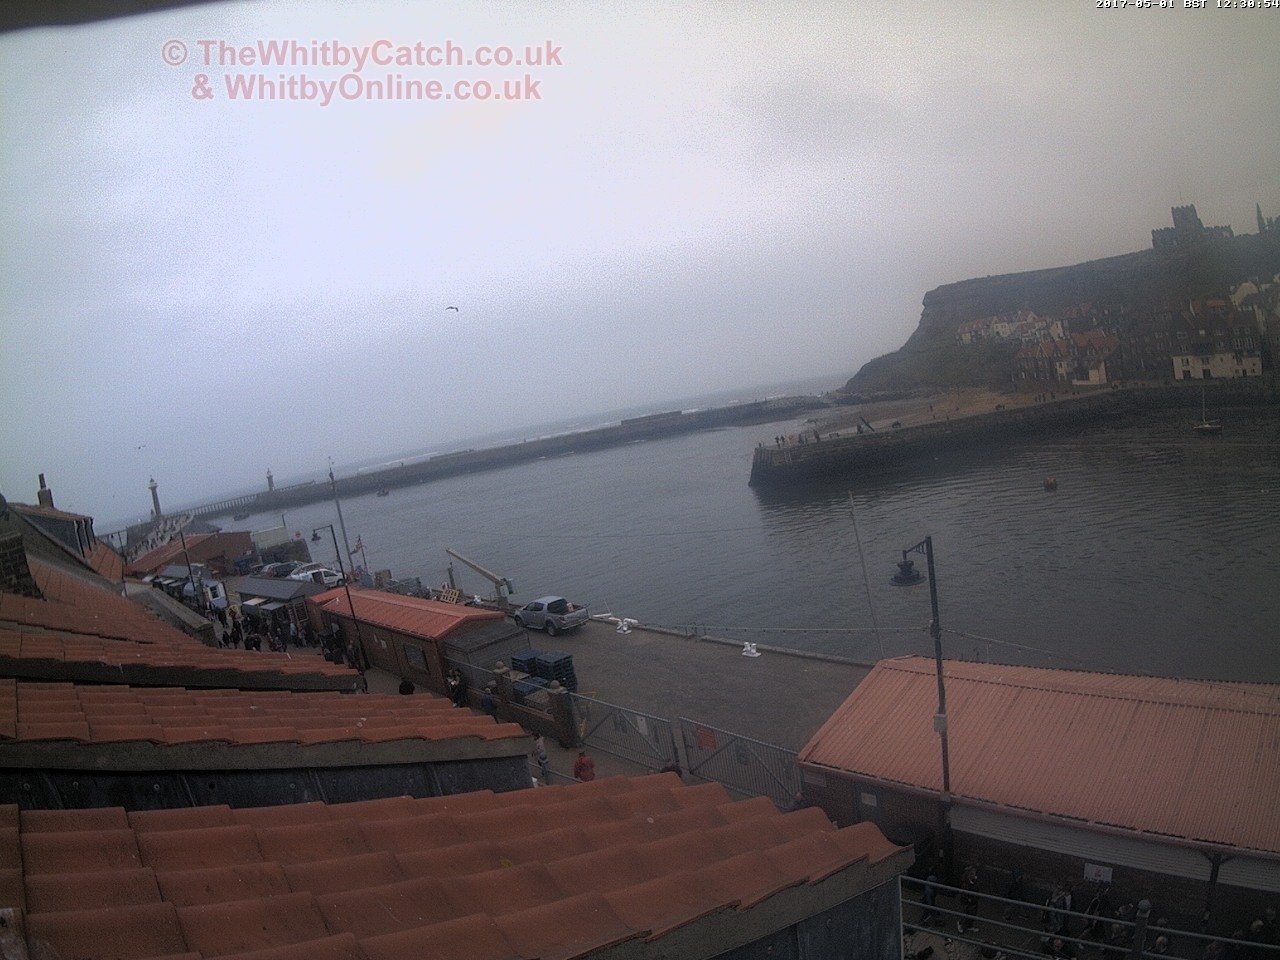 Whitby Mon 1st May 2017 12:31.